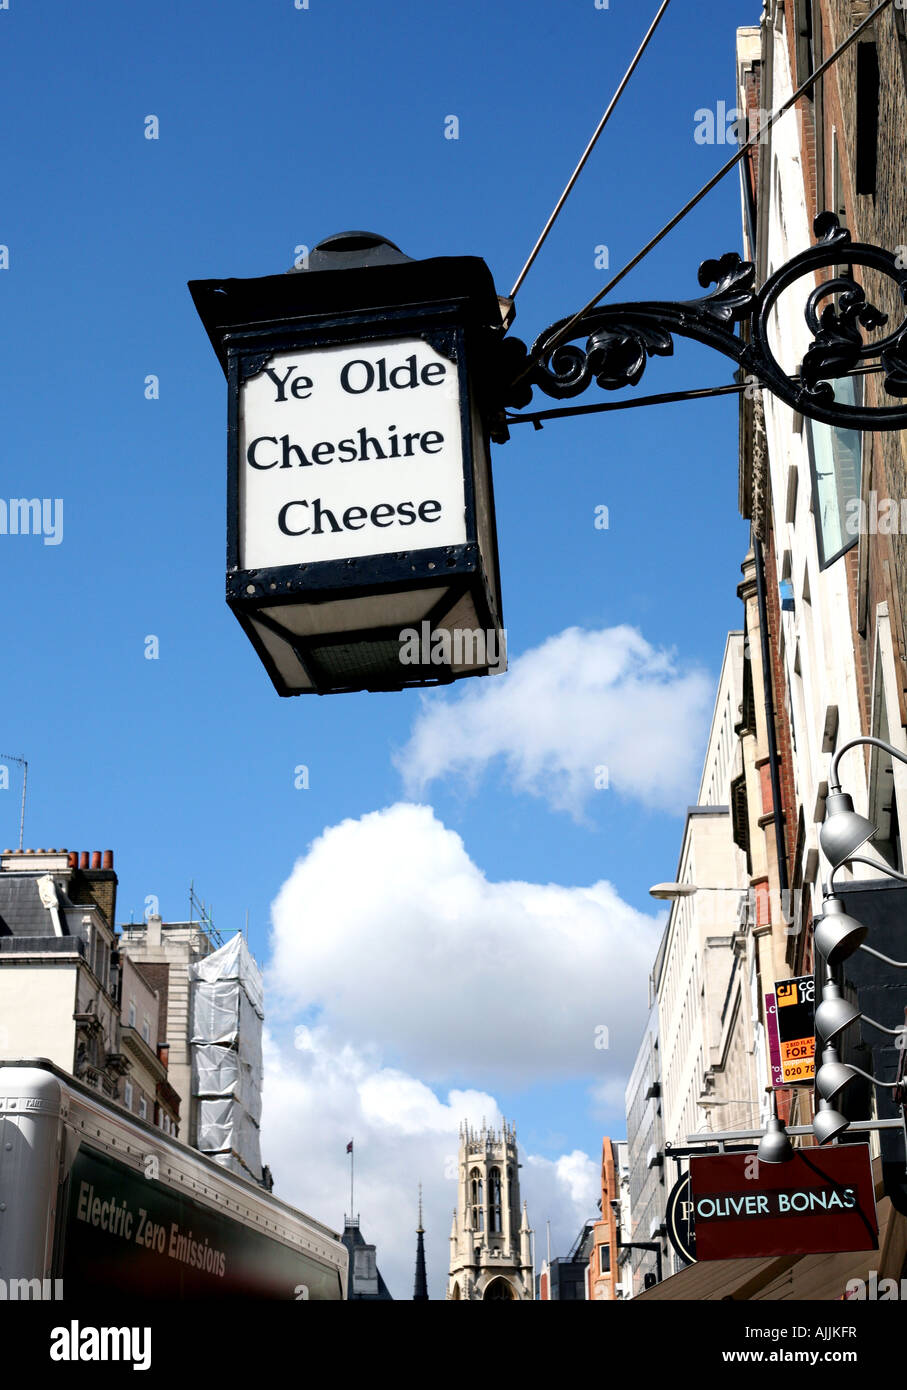 Sign for Ye Olde Cheshire Cheese famous Fleet Street pub in London Stock Photo